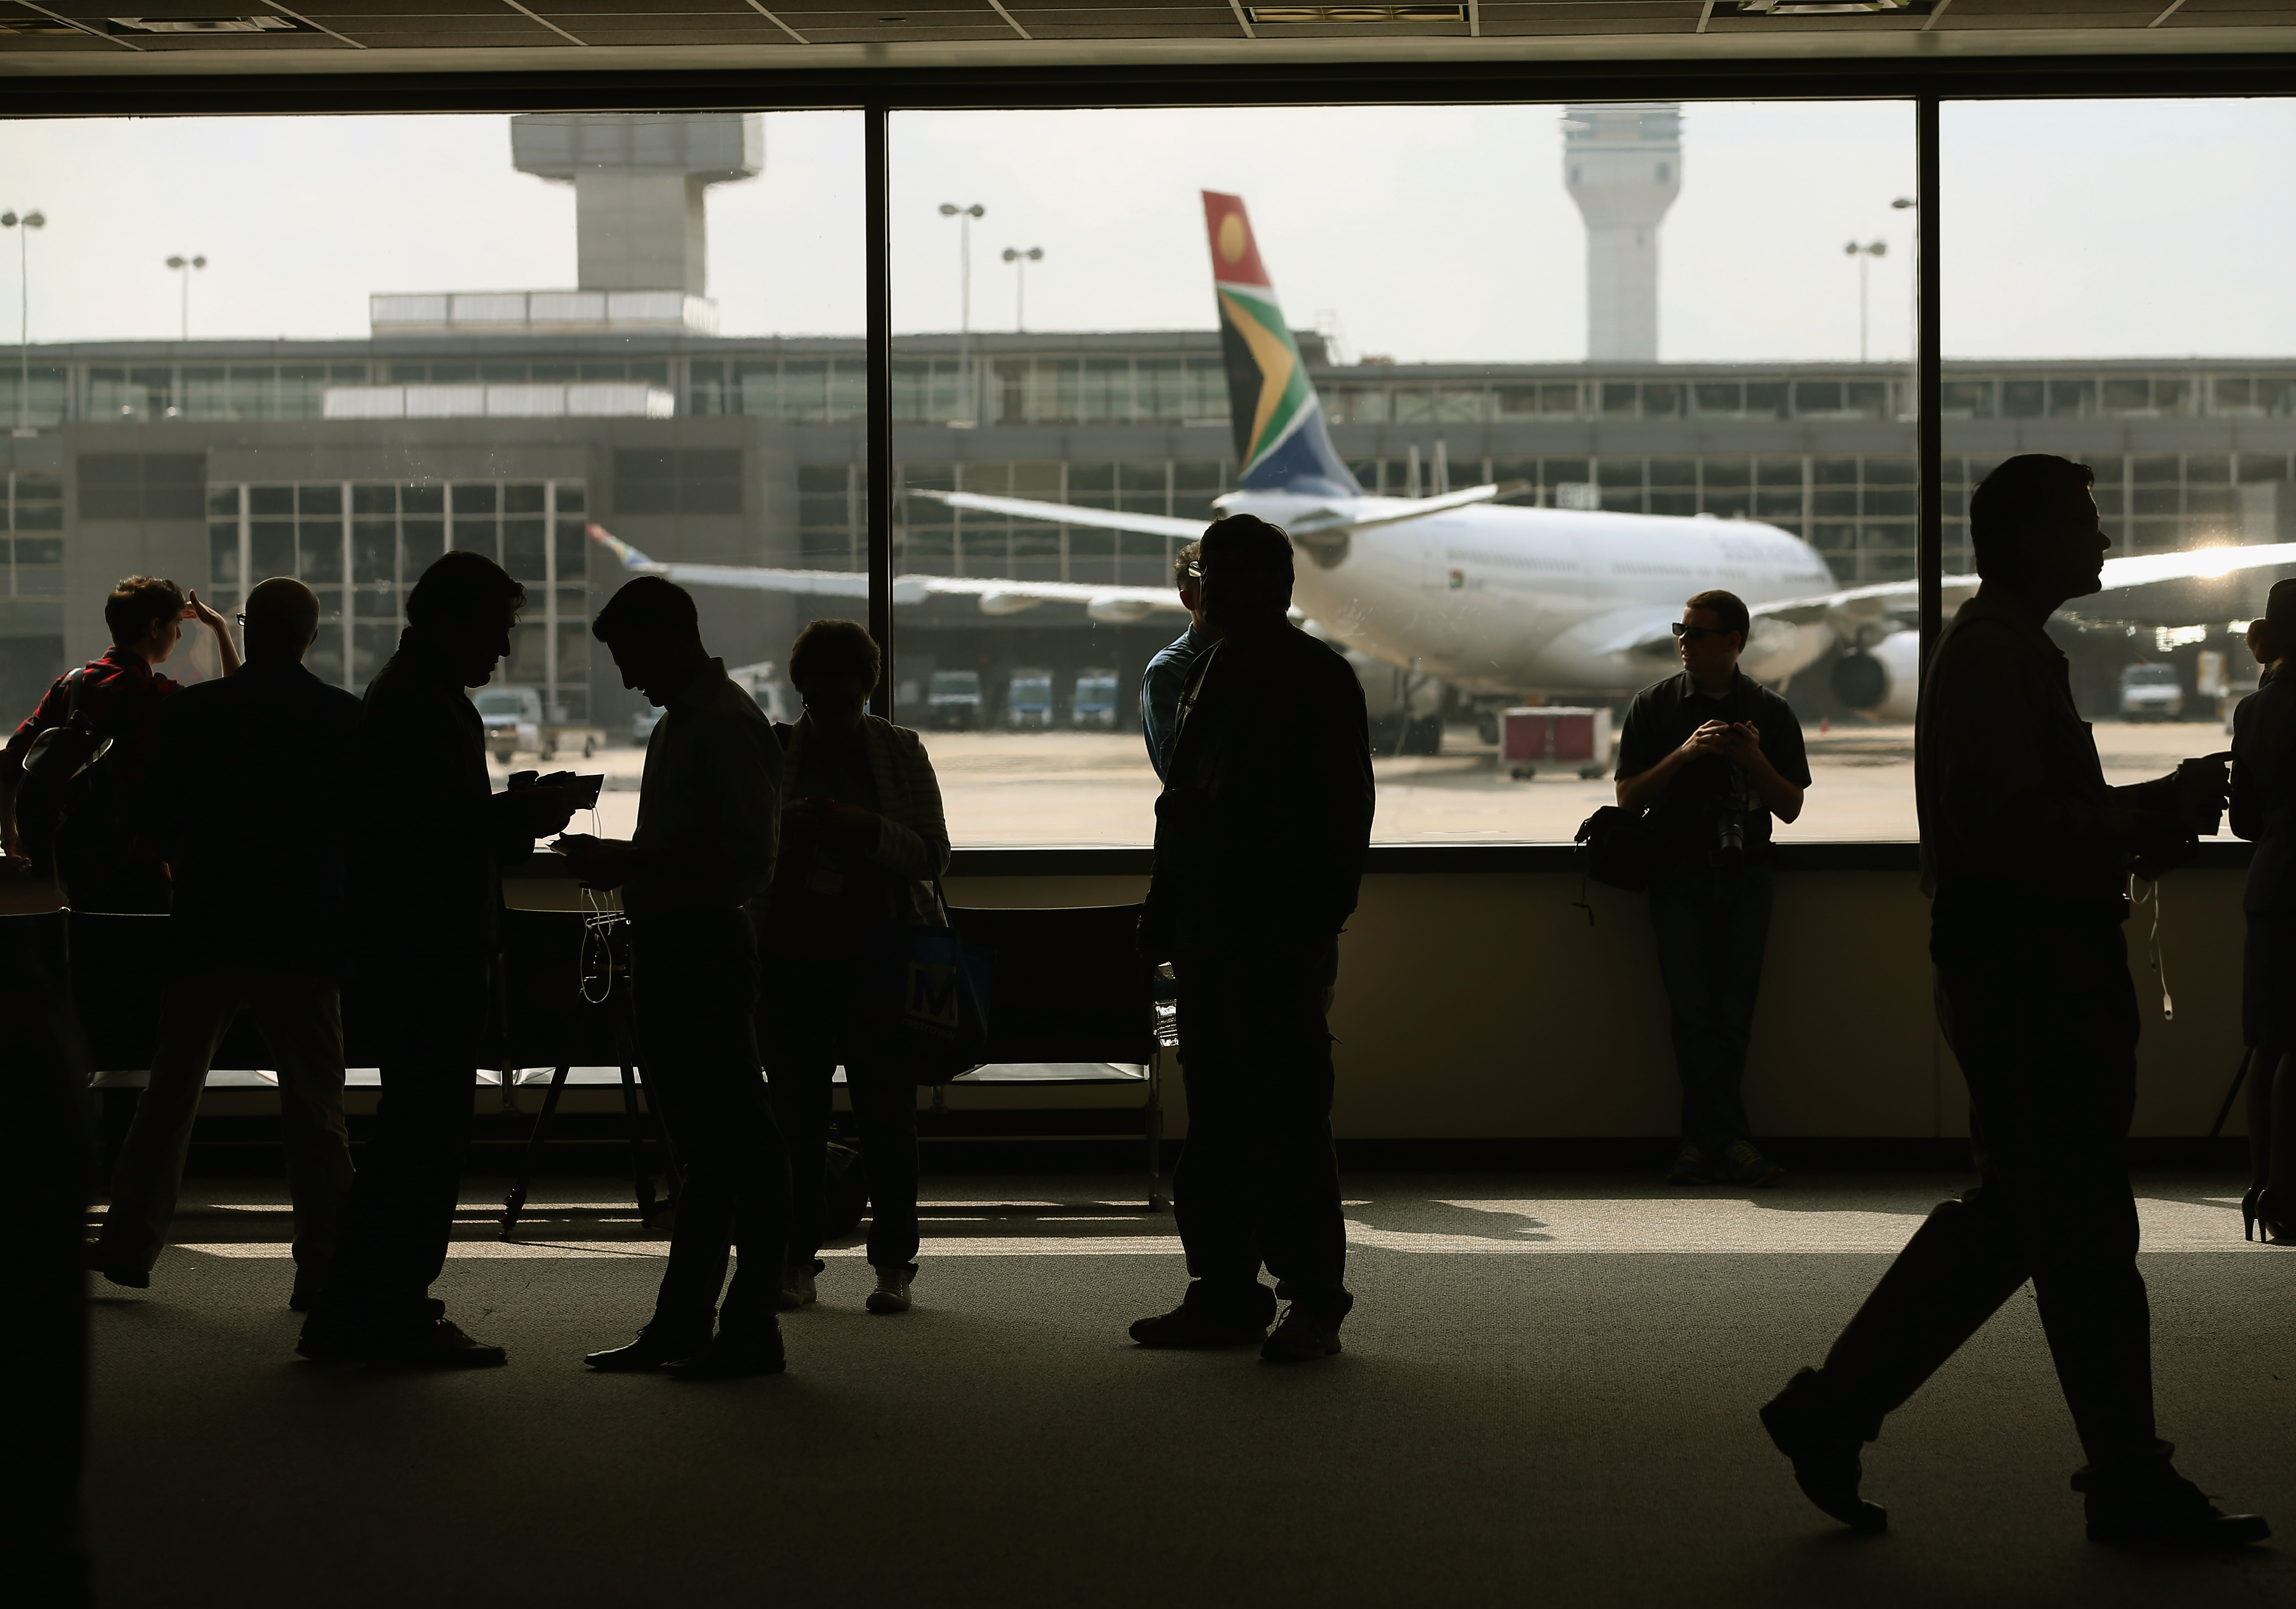 People stand in the main terminal at Washington Dulles International Airport is shown October 2, 2014 in Dulles, Virginia. (Mark Wilson&mdash;Getty Images)